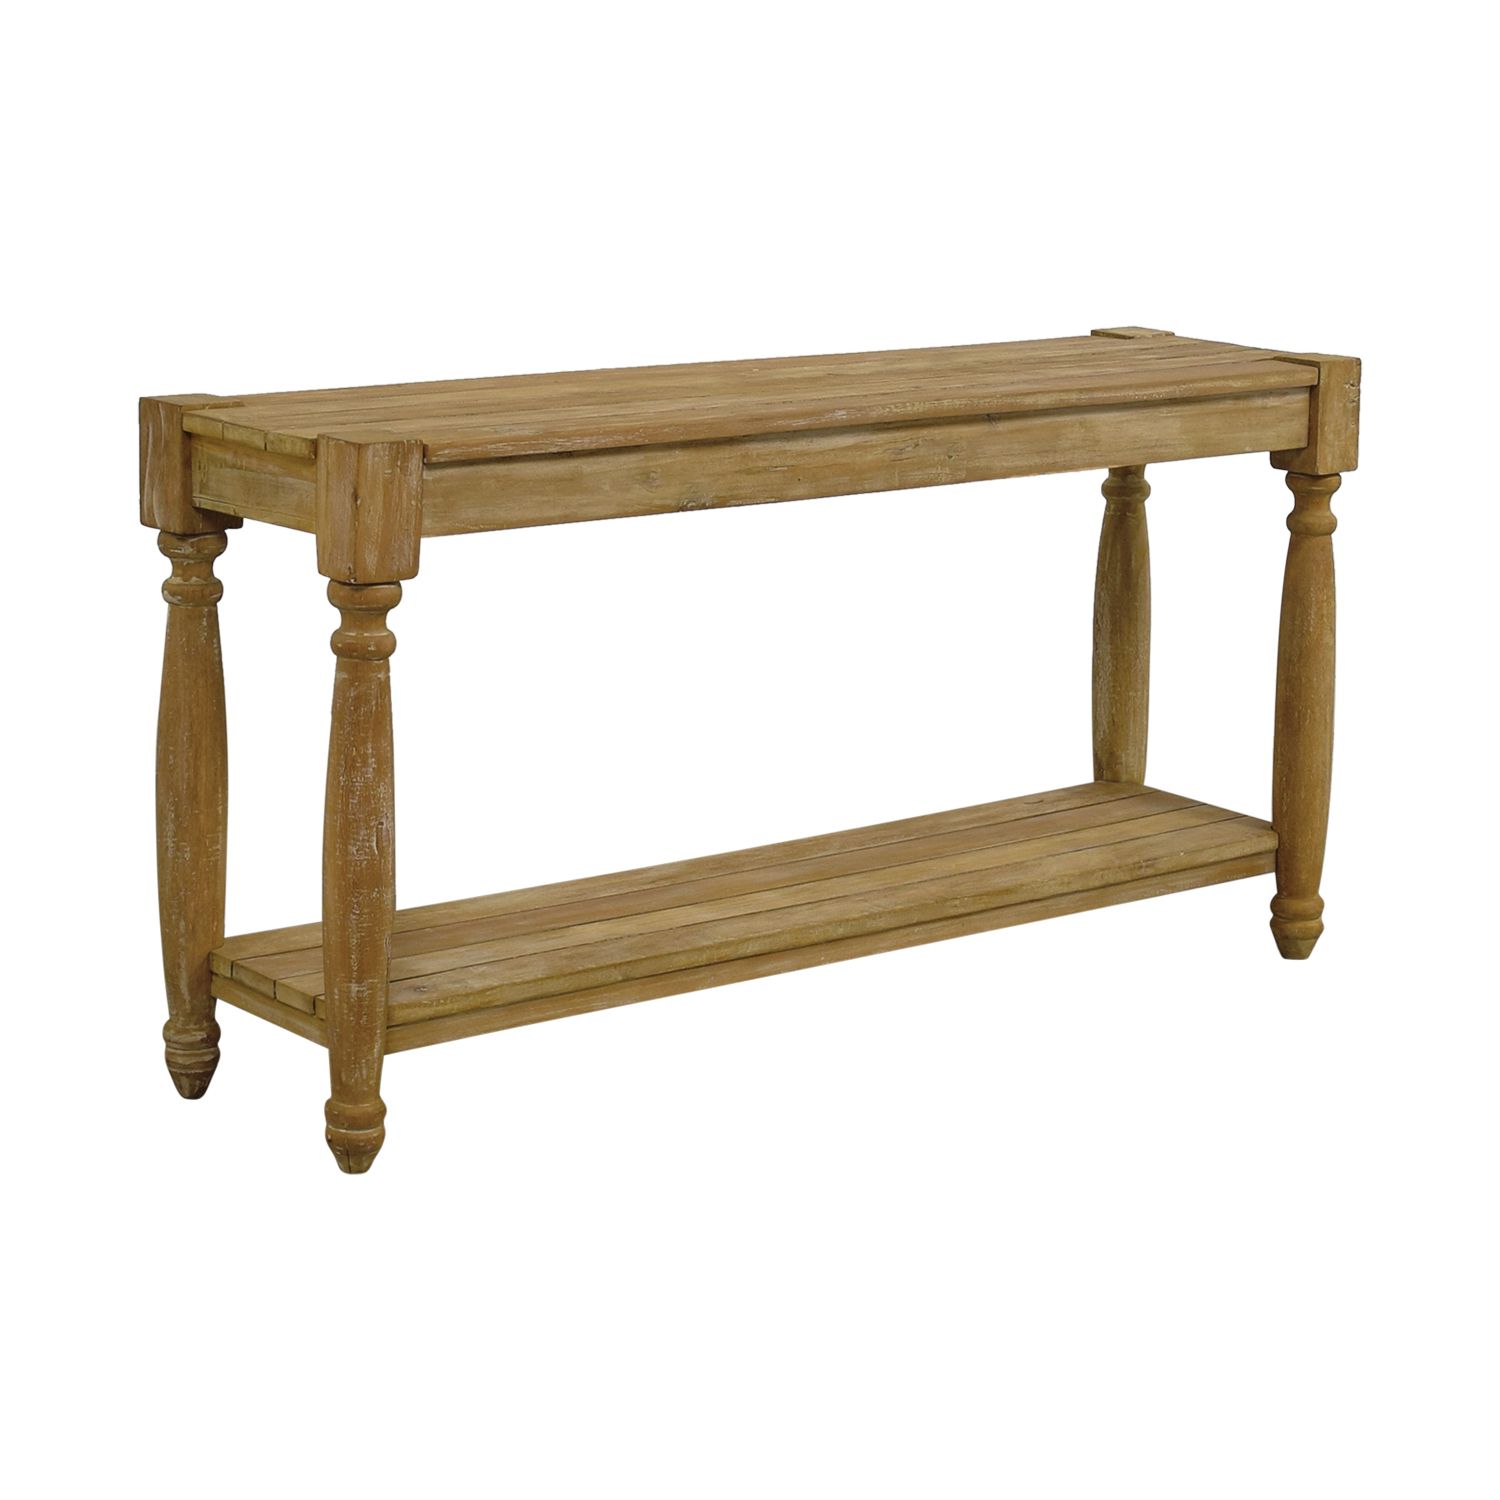 77% Off – Homegoods Homegoods Natural Wood Console Table / Tables Inside Natural Seagrass Console Tables (View 15 of 20)